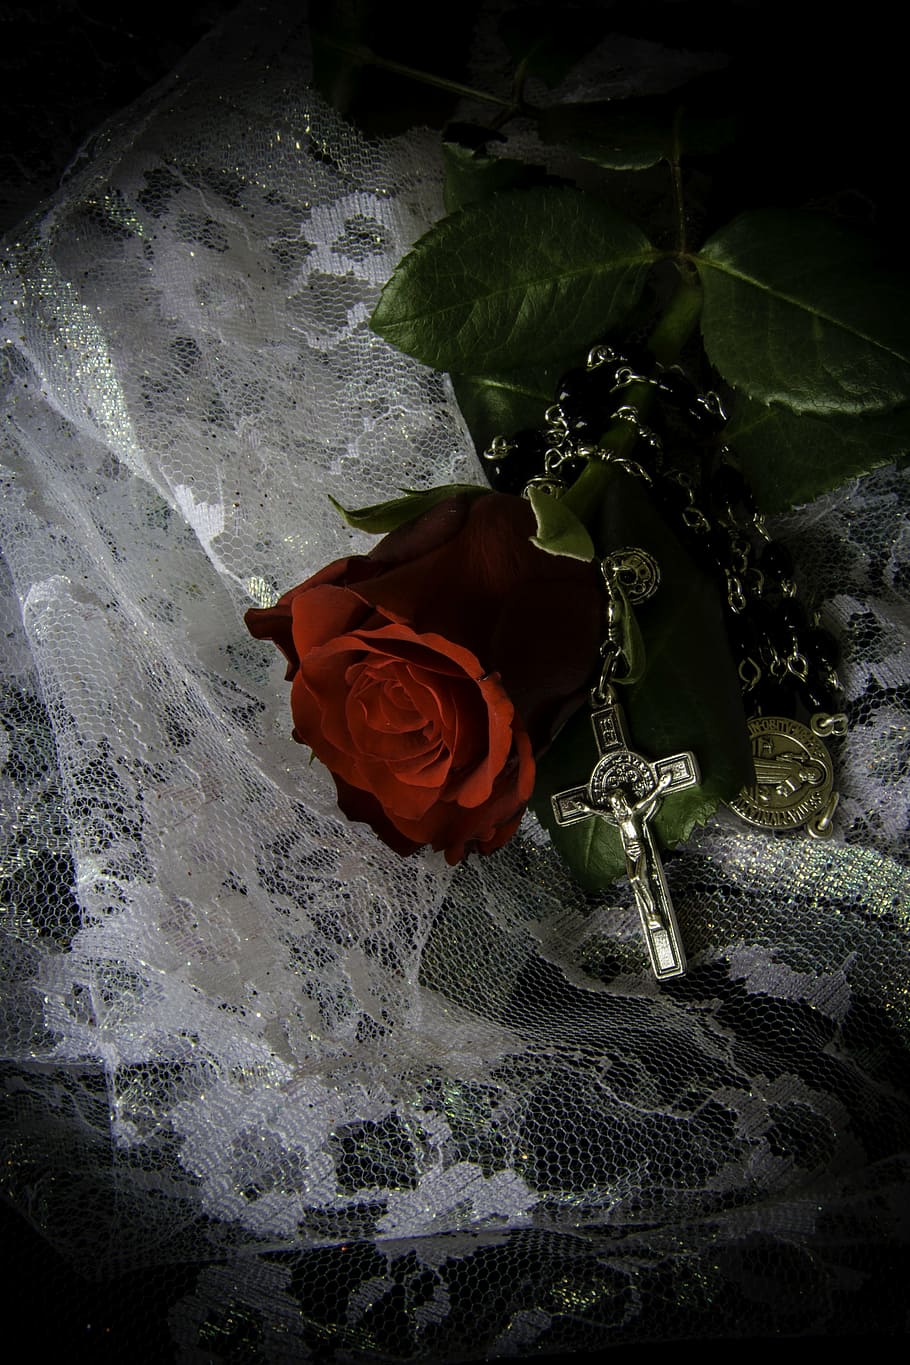 red rose beside silver-colored rosary on white lace textile, crucifix